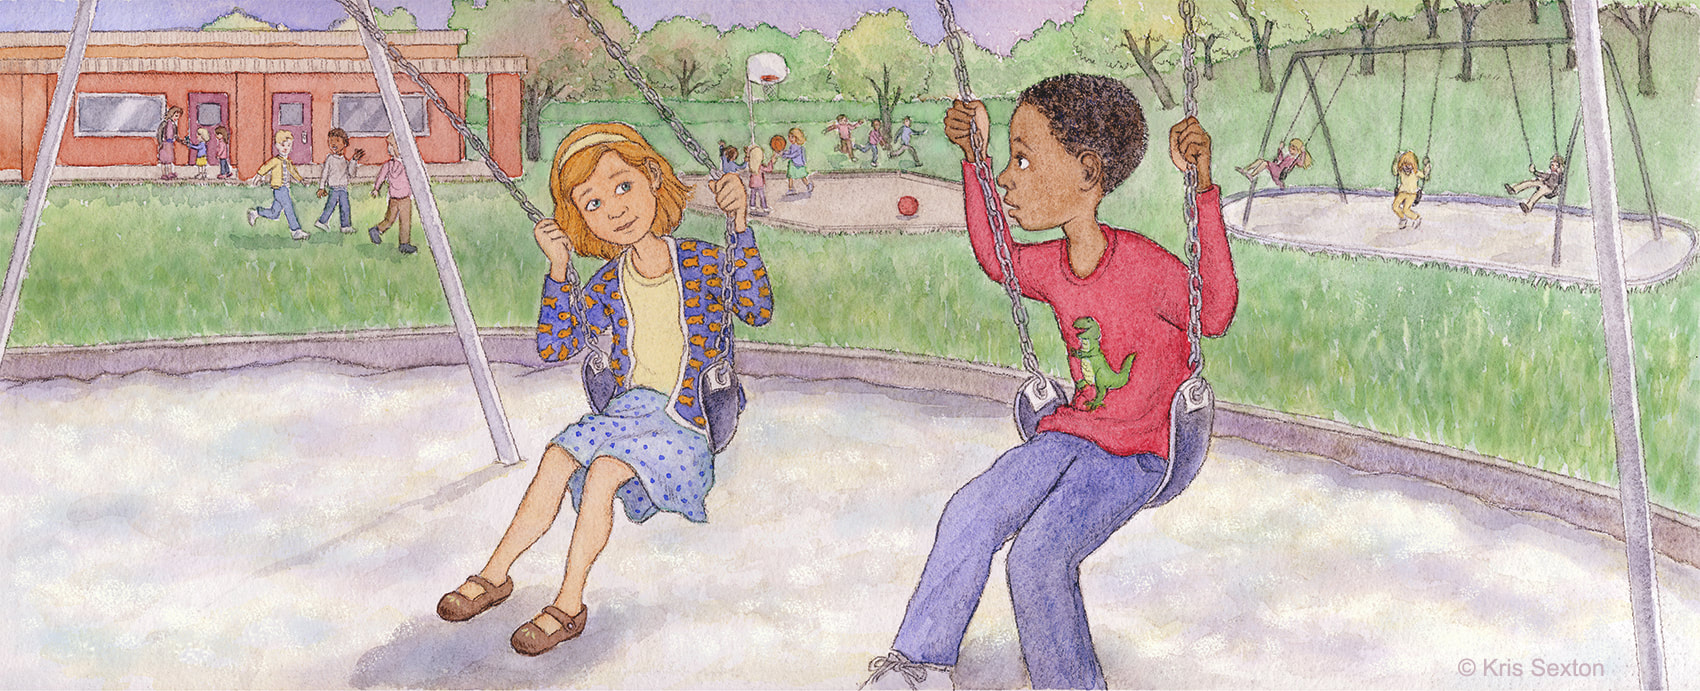 Friends: girl and boy on the school playground, sitting on swings and chatting.